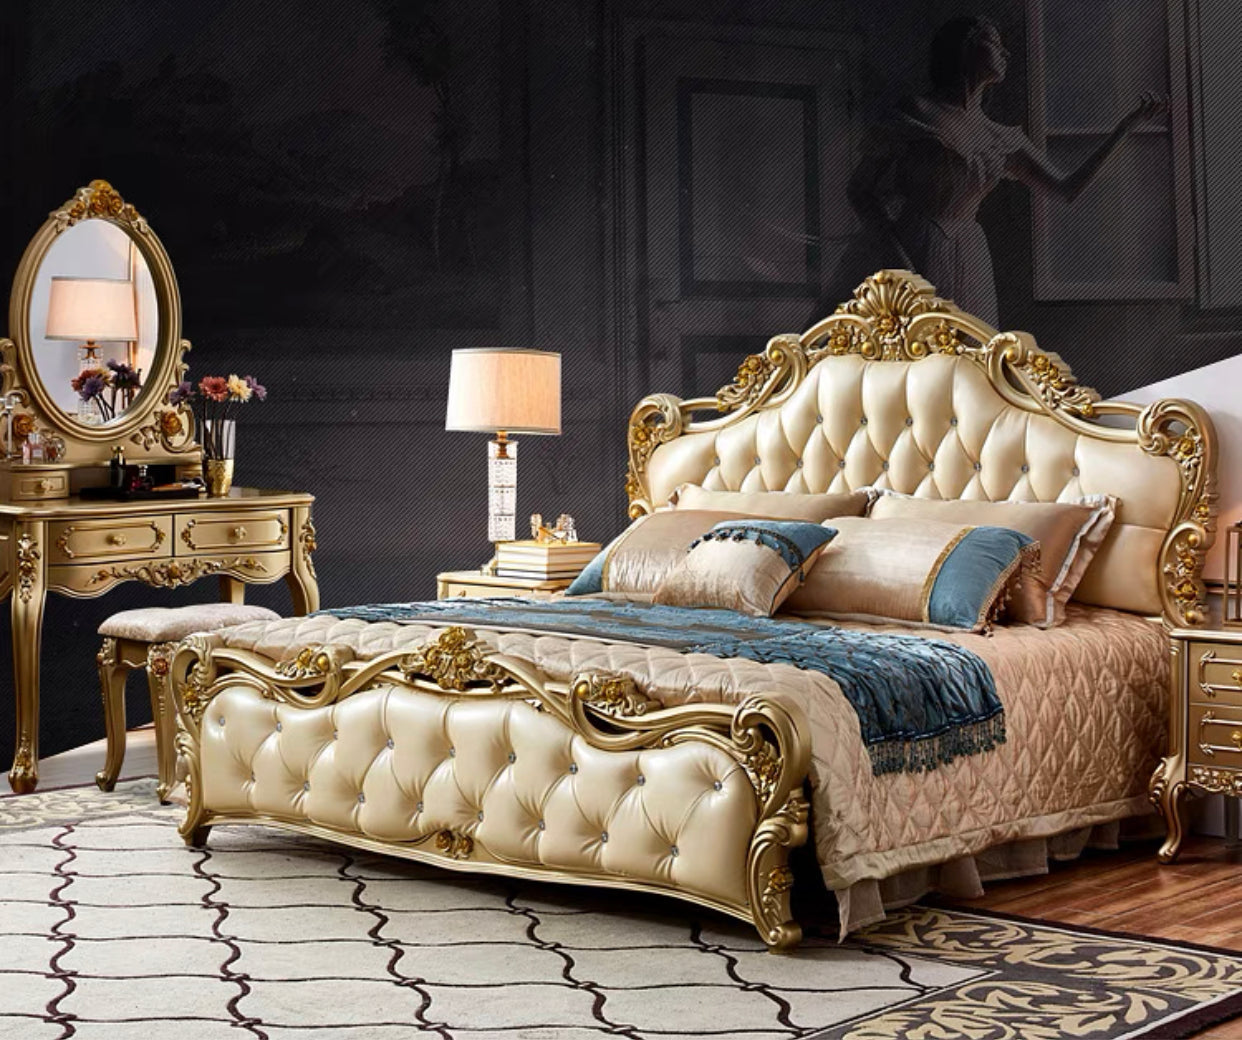 The X01 Bedroom Set is a testament to the timeless appeal of European style, seamlessly blending comfort and luxury. The set comprises seven pieces, each intricately designed with its unique flair. The cream and gold color scheme brings warmth to any bedroom, adding a touch of elegance that transcends trends. Each furniture piece showcases an intricate tufted design that provides not only an aesthetic appeal but also unrivaled comfort. Hand-picked fabrics make up the tufting, providing you with long-lasting quality and comfort. Embrace the Rococo era and experience ultimate relaxation and sophistication with this glorious bedroom set. Its gold highlights and cream backdrop create a tranquil ambiance, perfect for relaxation and restful sleep. Experience the best of European style with the X01 Luxurious Gold/Cream Tufted Rococo Bedroom Set, the perfect addition to any sleep sanctuary.